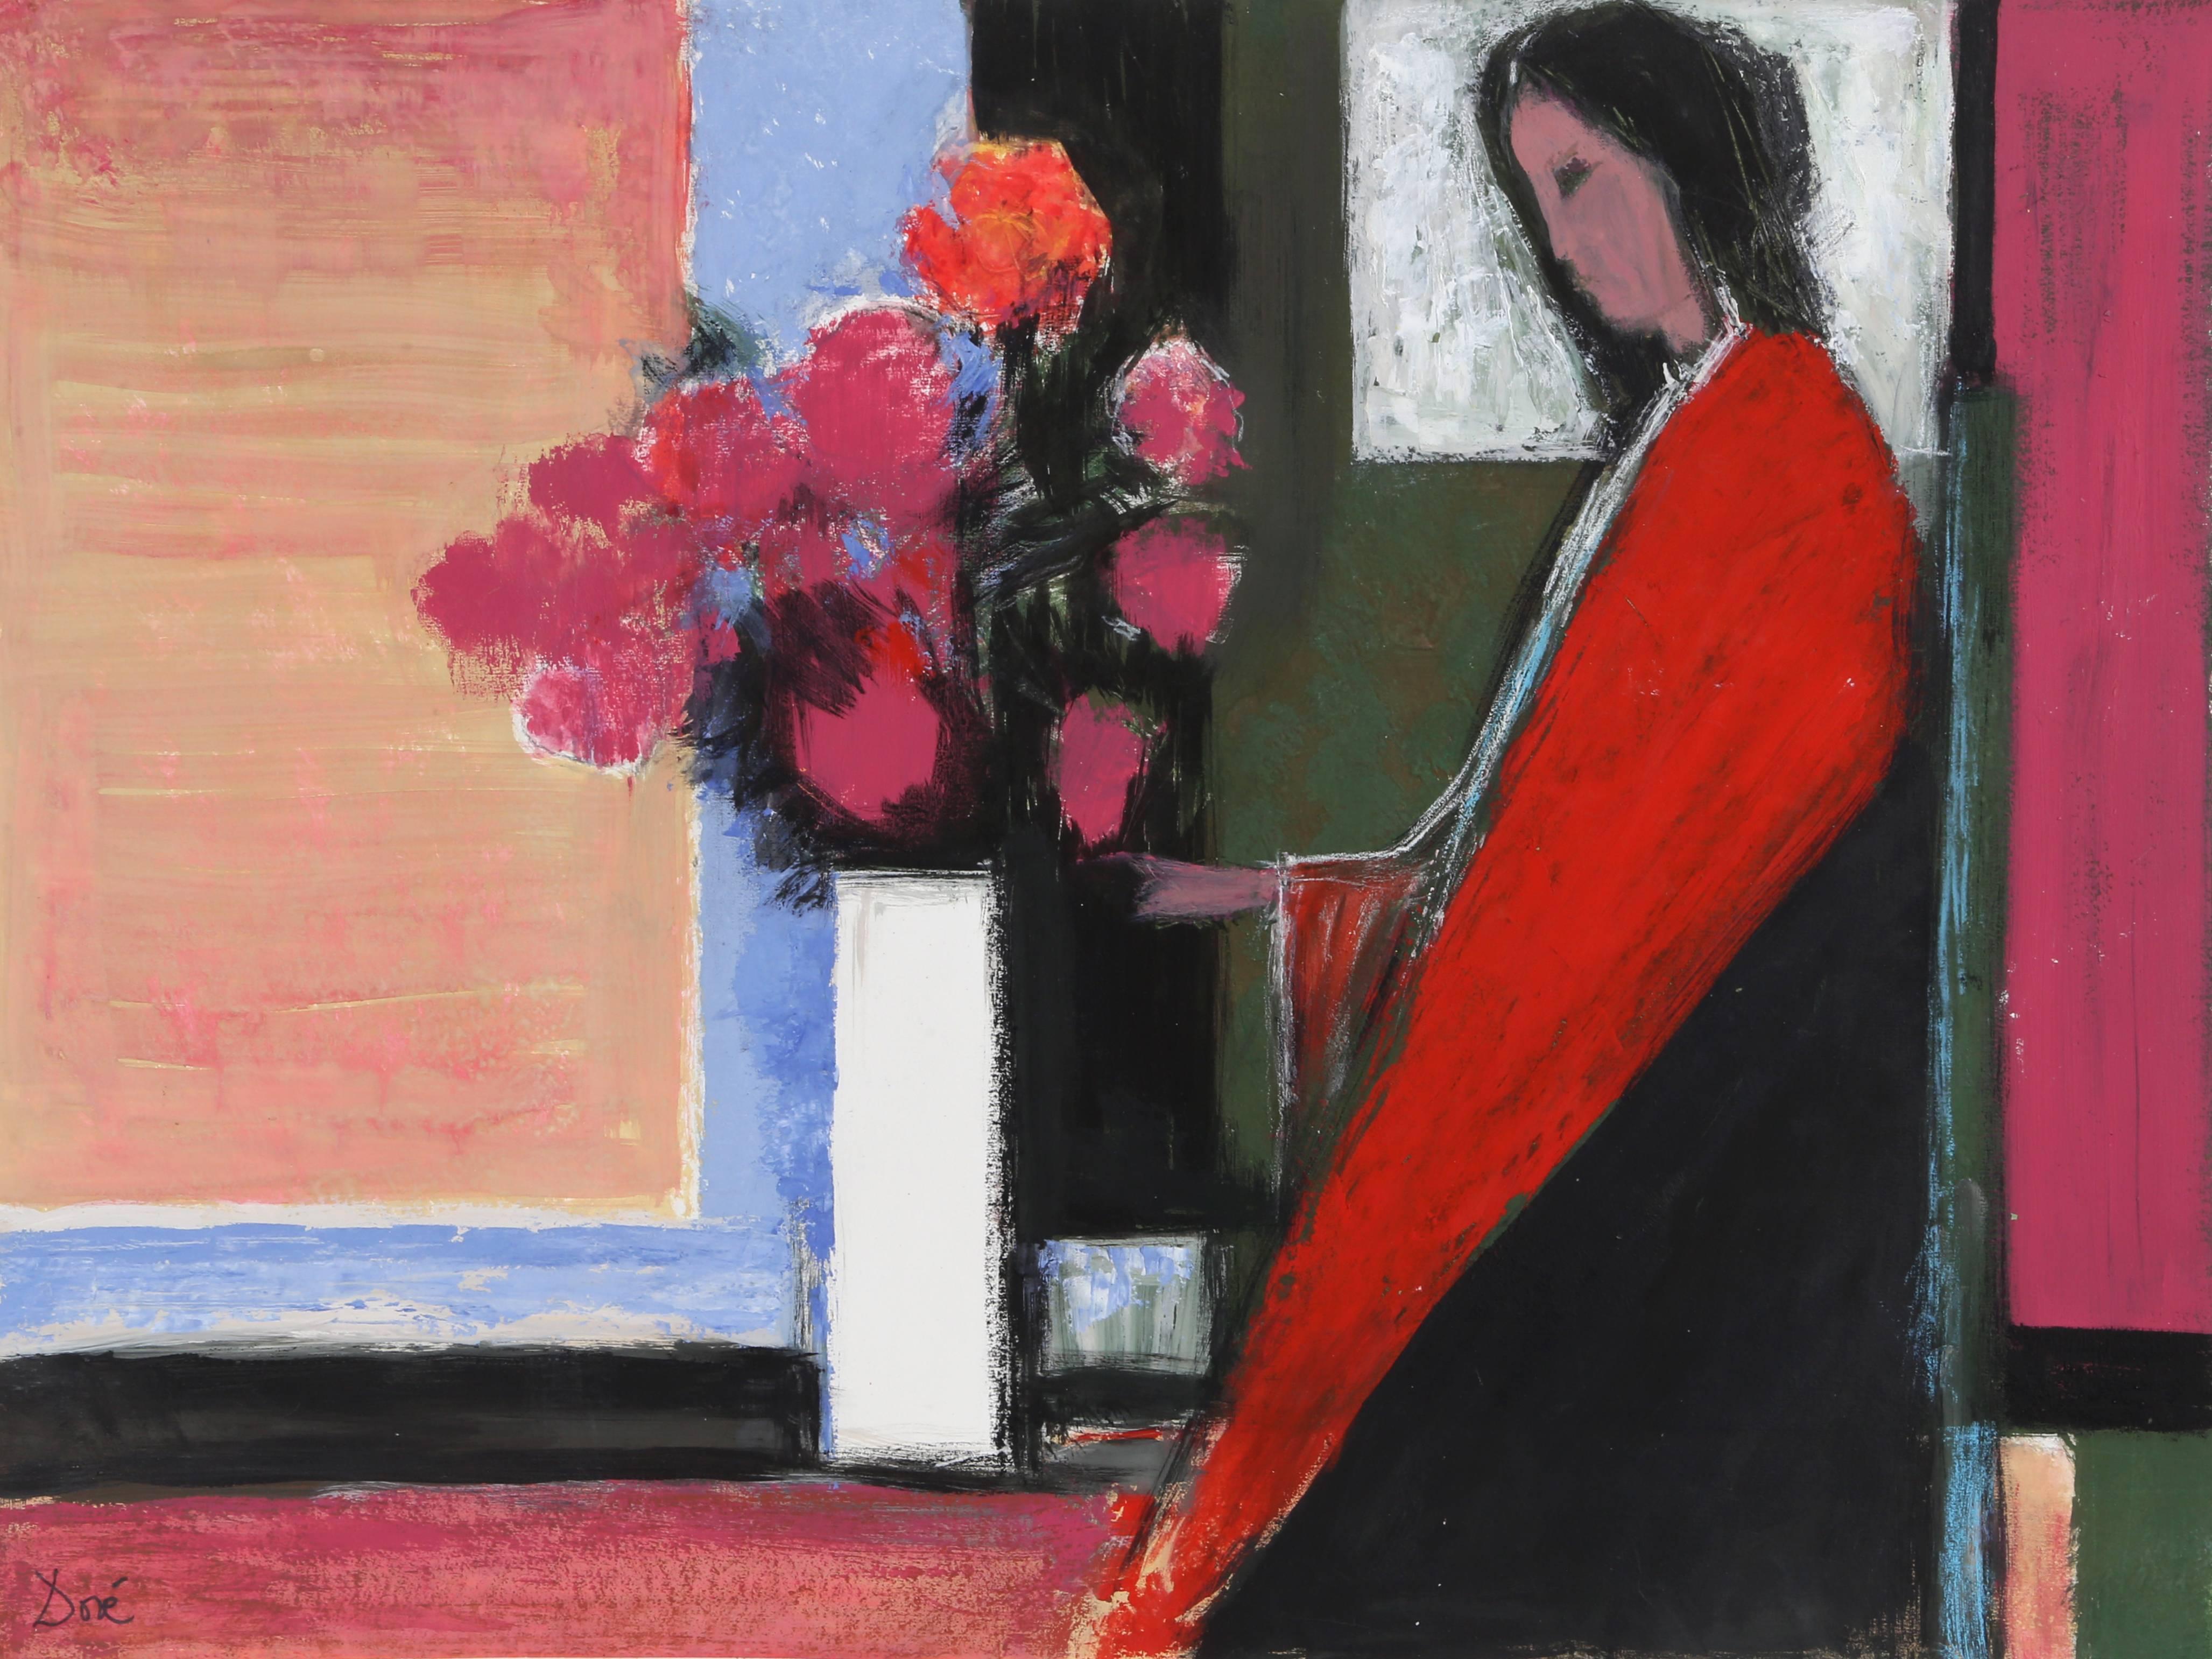 Jose Canes (Dore) Figurative Painting - "Woman in Red, " Acrylic and Pastel on Paper by Jose Canes, circa 1980